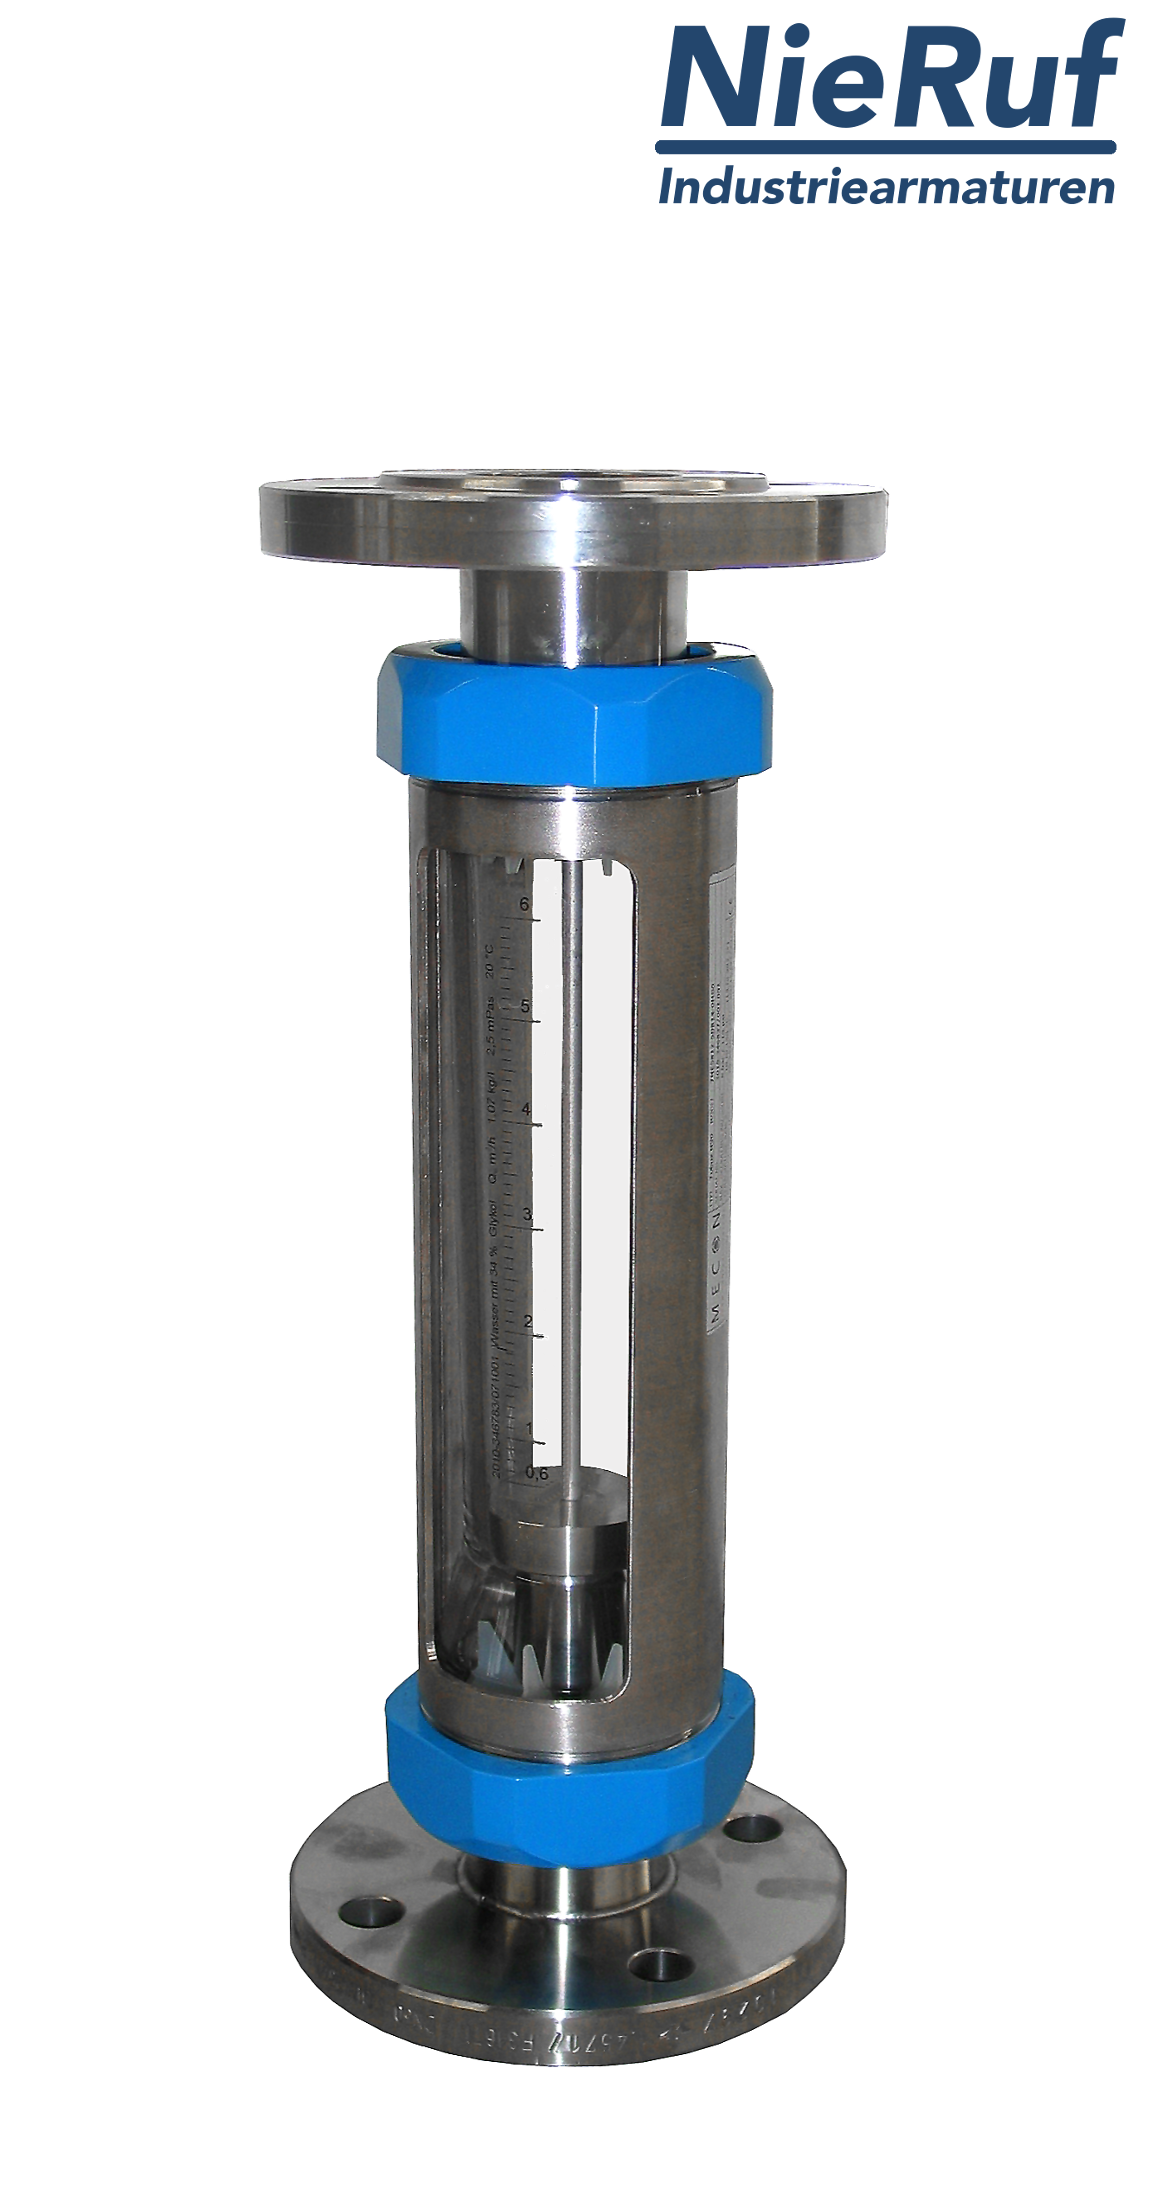 Variable area flowmeter stainless steel + borosilicate flange DN20 1.0 - 10.0 l/h water FKM